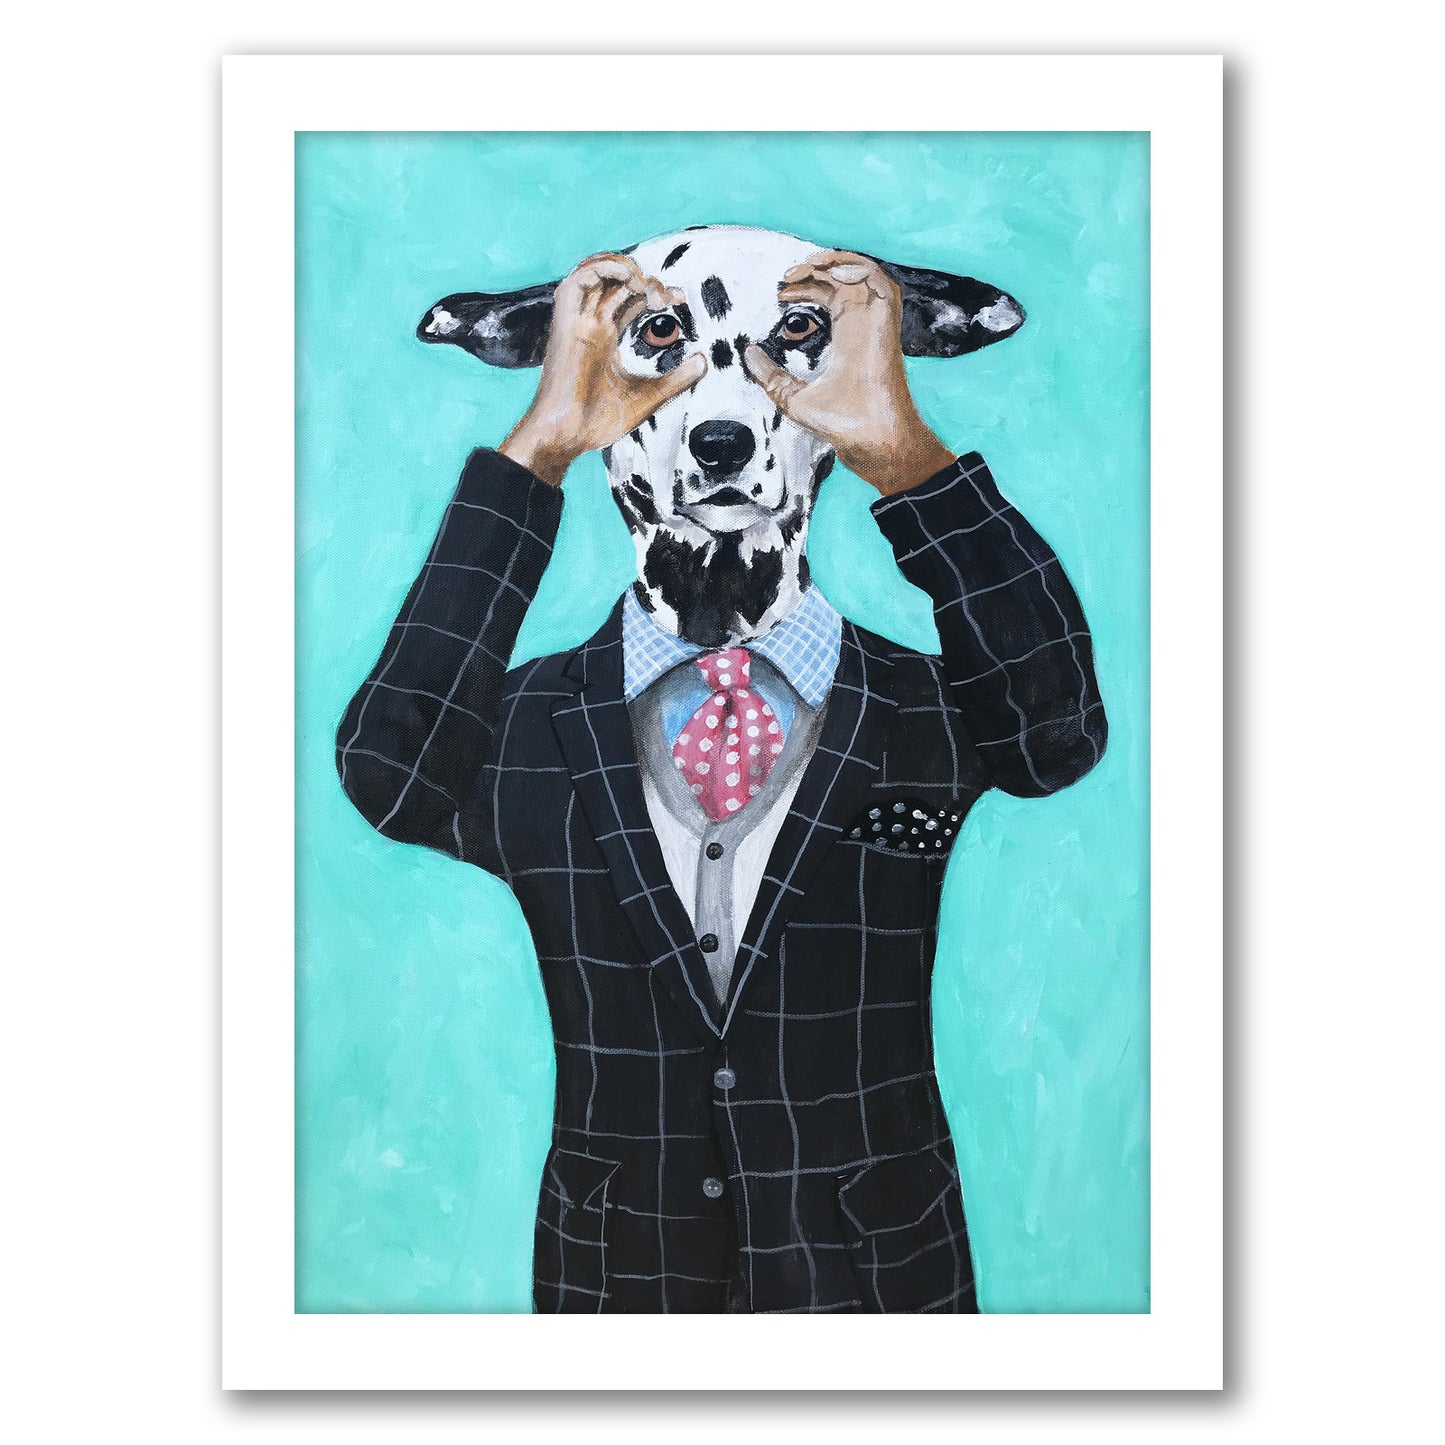 Dalmatian Is Watching You By Coco De Paris - White Framed Print